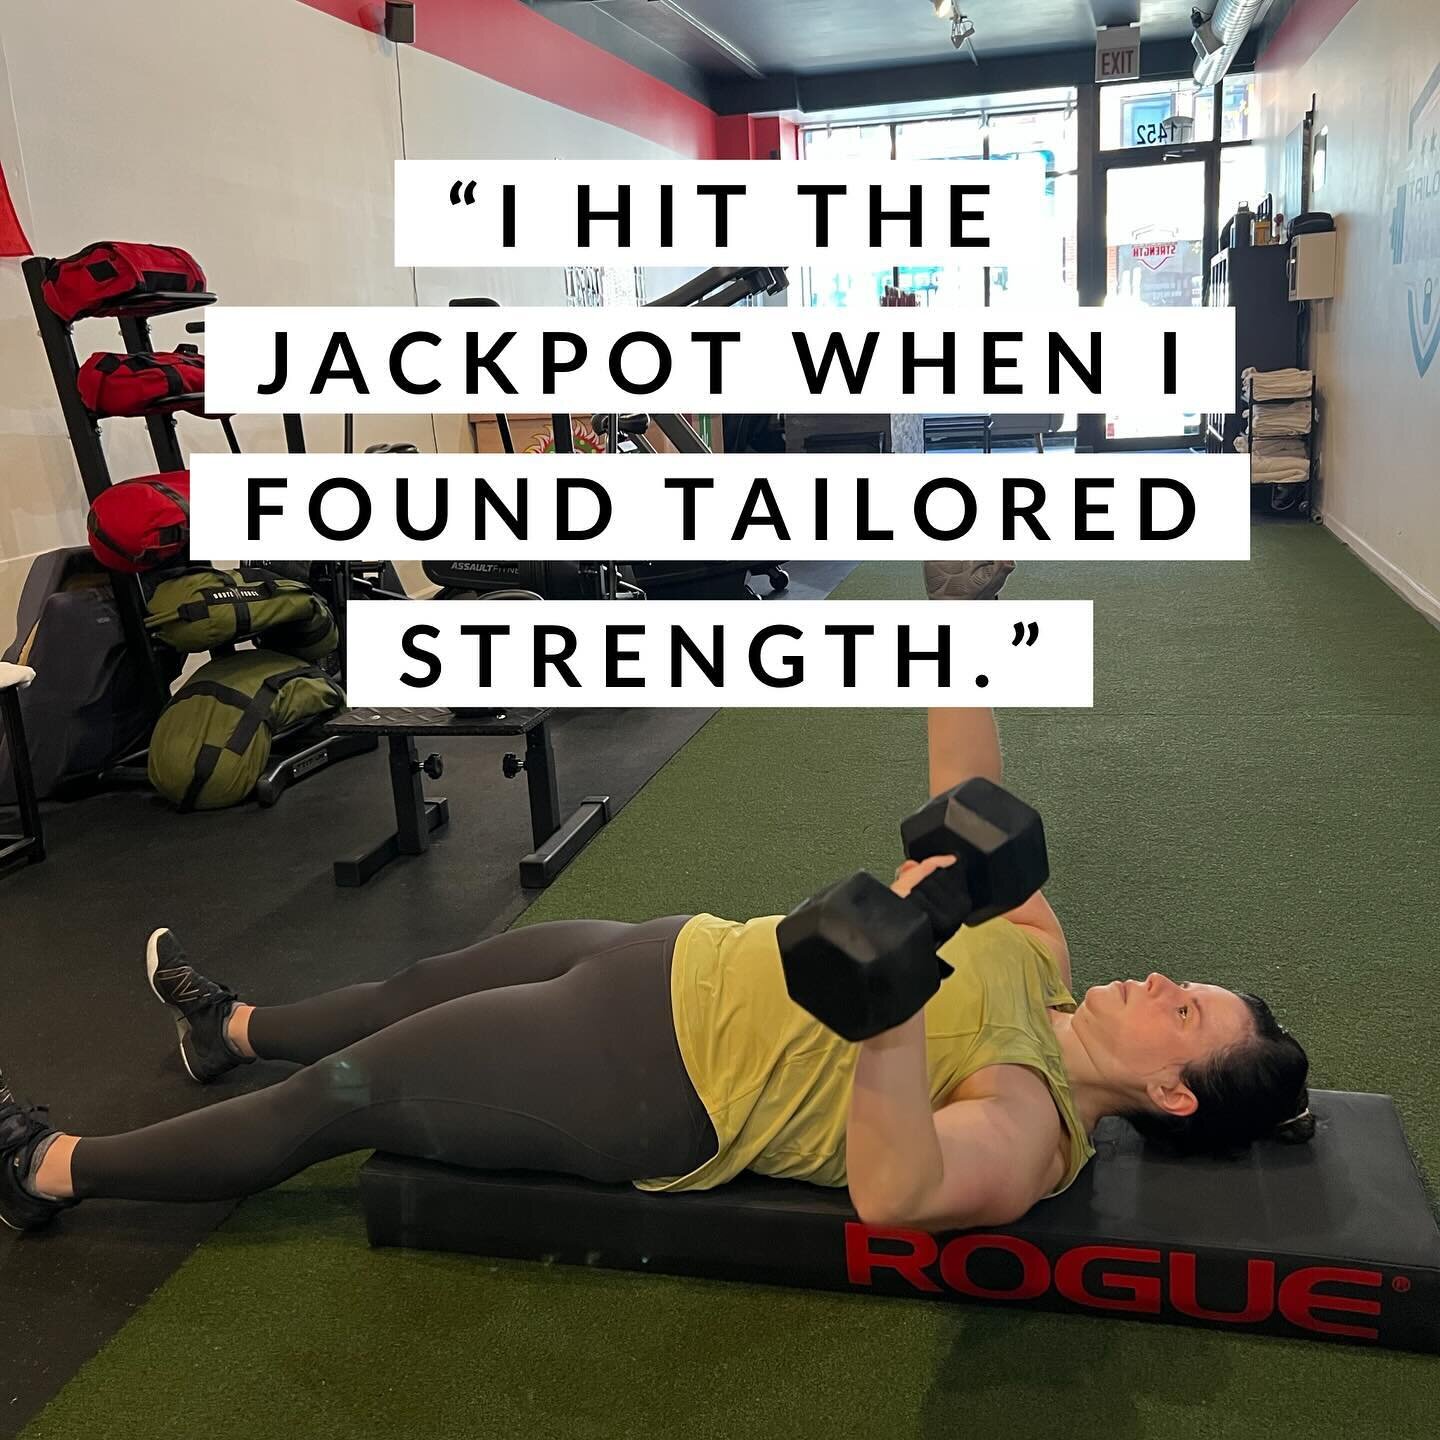 We love making our clients feel this way!! Emily has tackled big fitness goals and is a critical piece of our TS community. We know that you&rsquo;ll get a feel for what makes us special when you try us out for one free week of semi-private training.